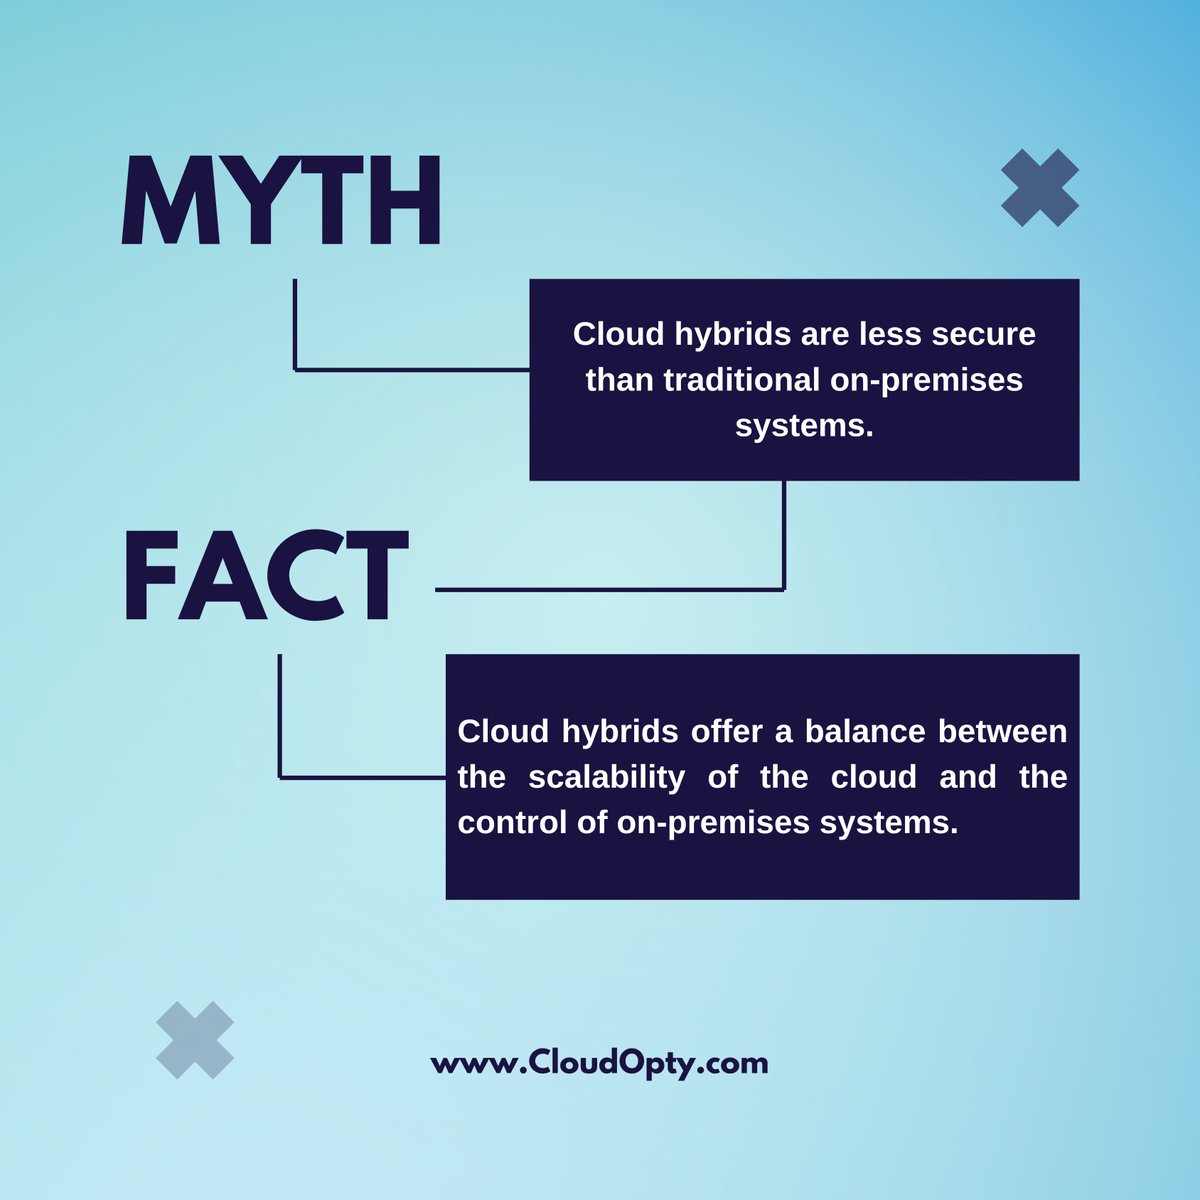 😱 Unraveling the mysteries of cloud hybrid! 💭☁️ Dive into the world of myths and facts surrounding cloud hybrid solutions. Let's debunk misconceptions and illuminate the truth together.

#CloudHybrid #MythsVsFacts #TechTruths #CloudOpty #cloudcomputing #cloudserviceprovider